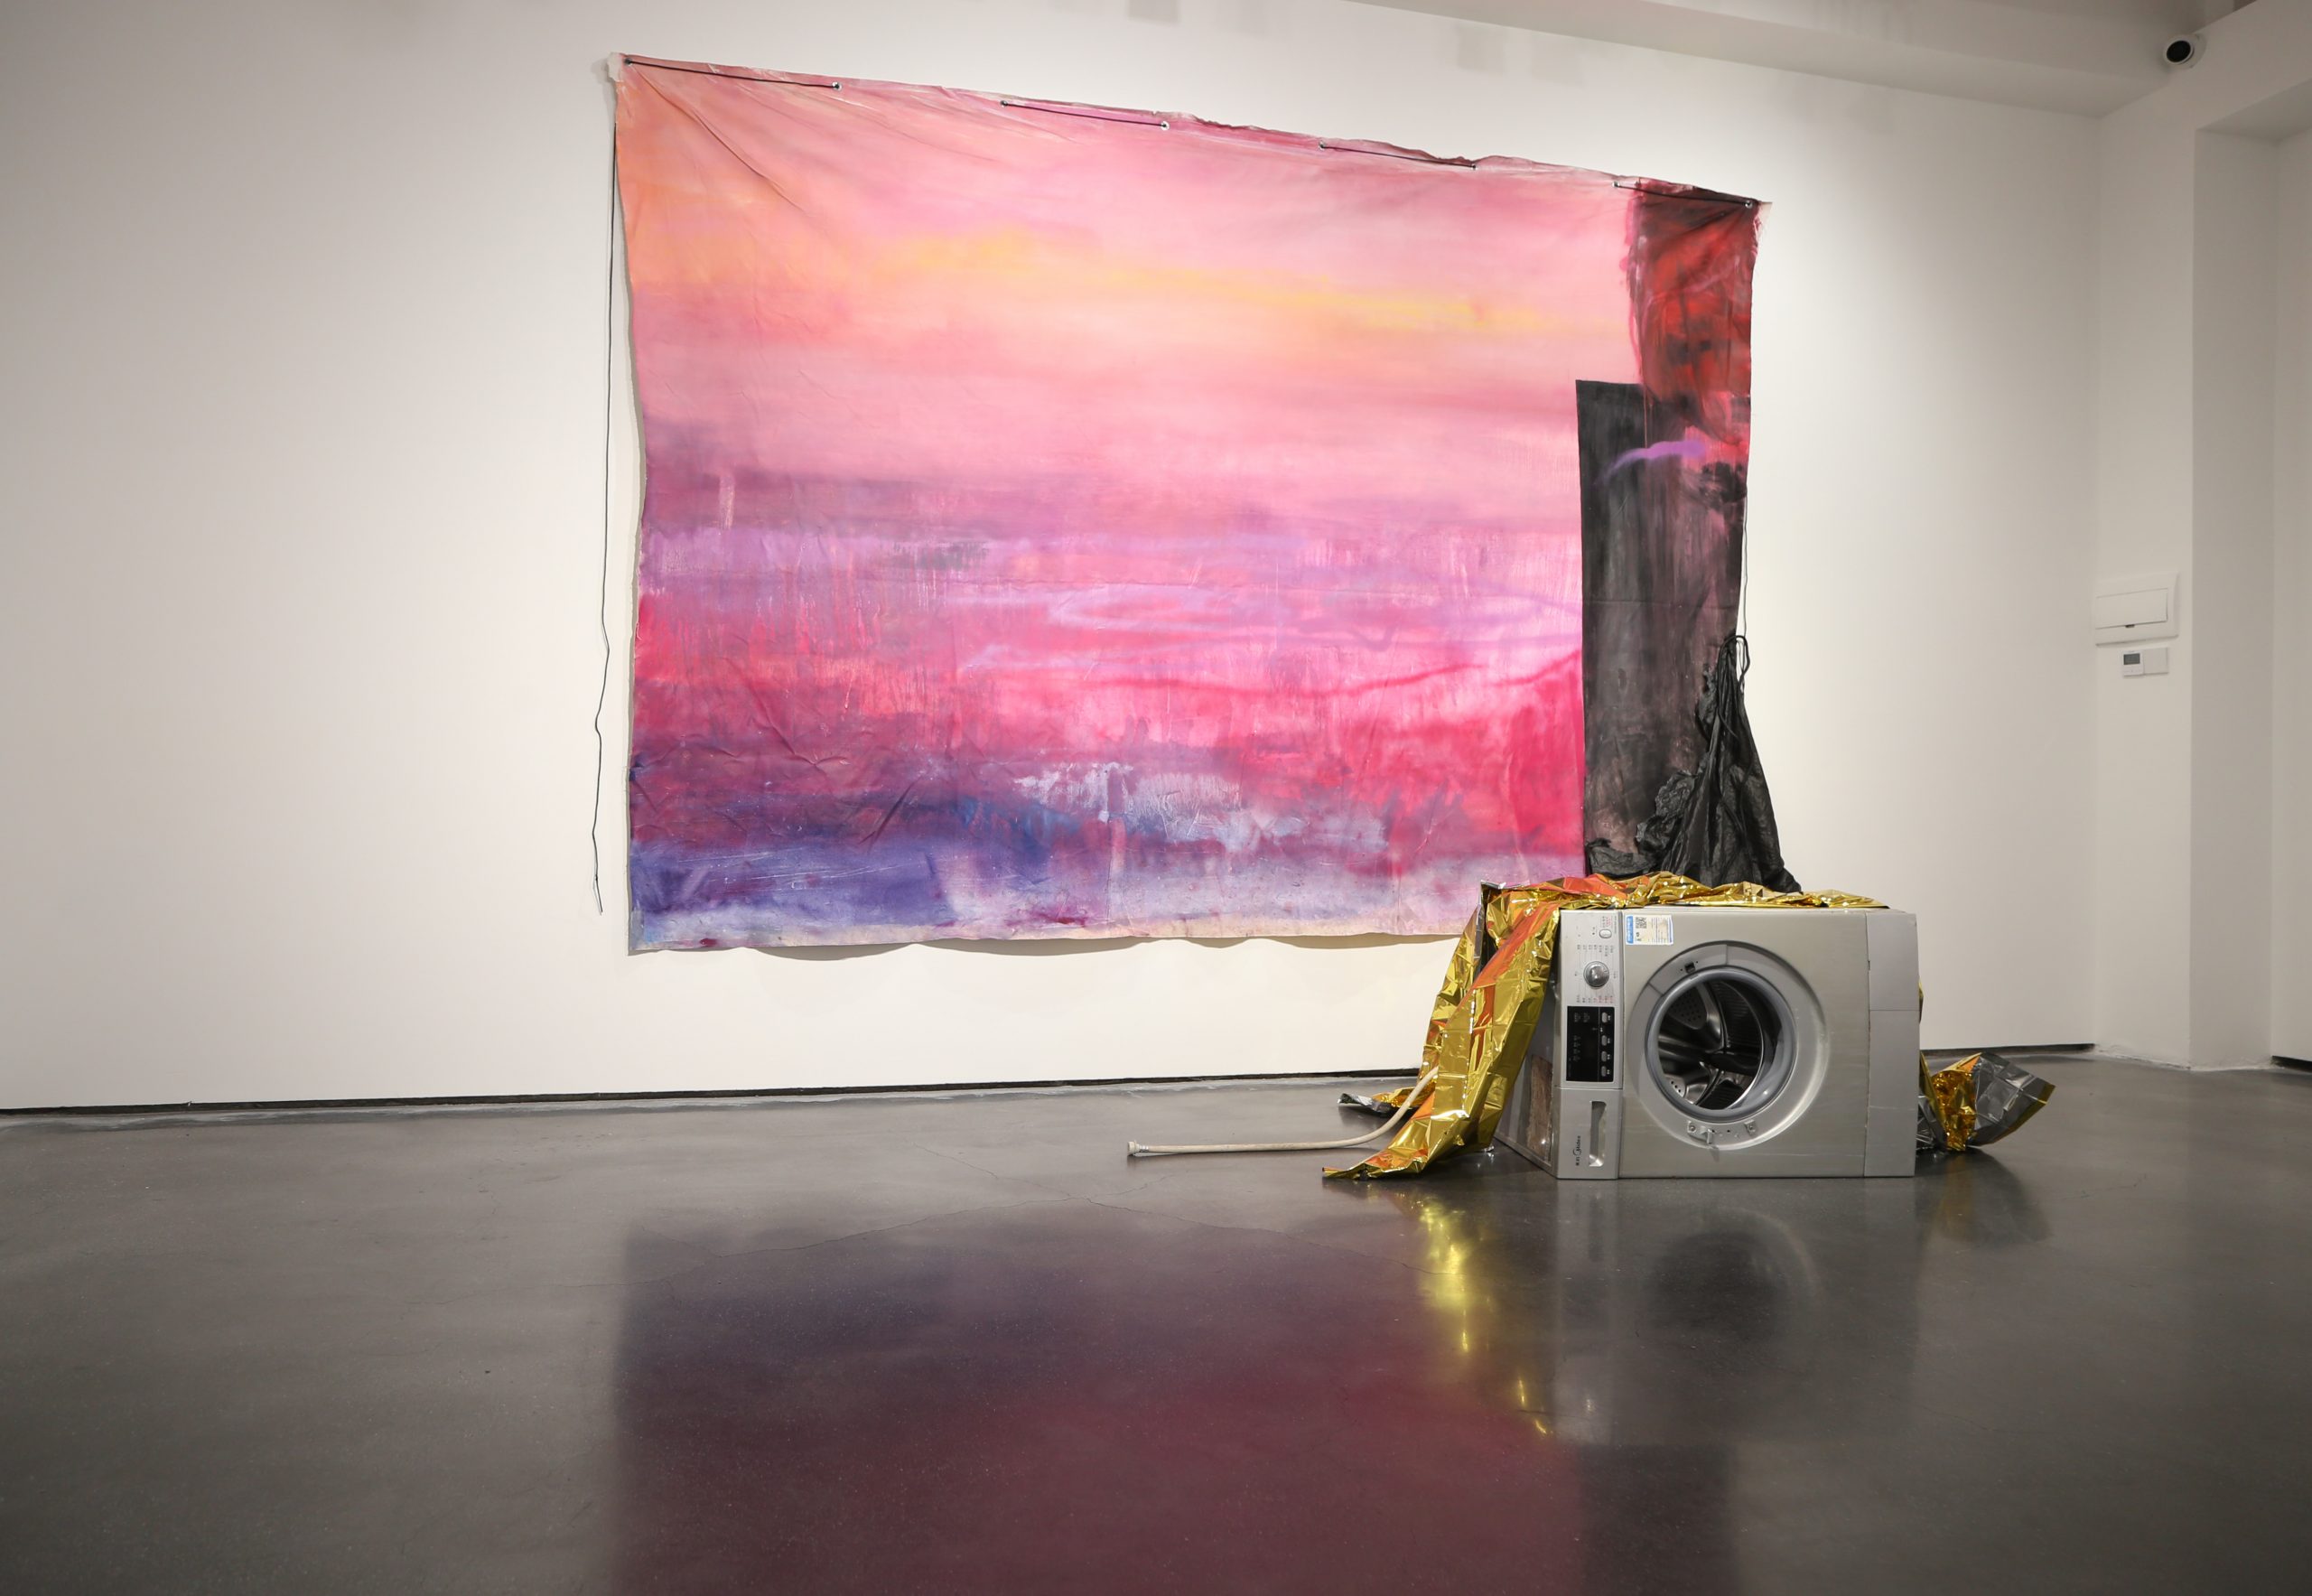 in the foreground a broken washing machine covered with a golden emergency blanket. in the background a large magenta abstract painting resembling a sunset